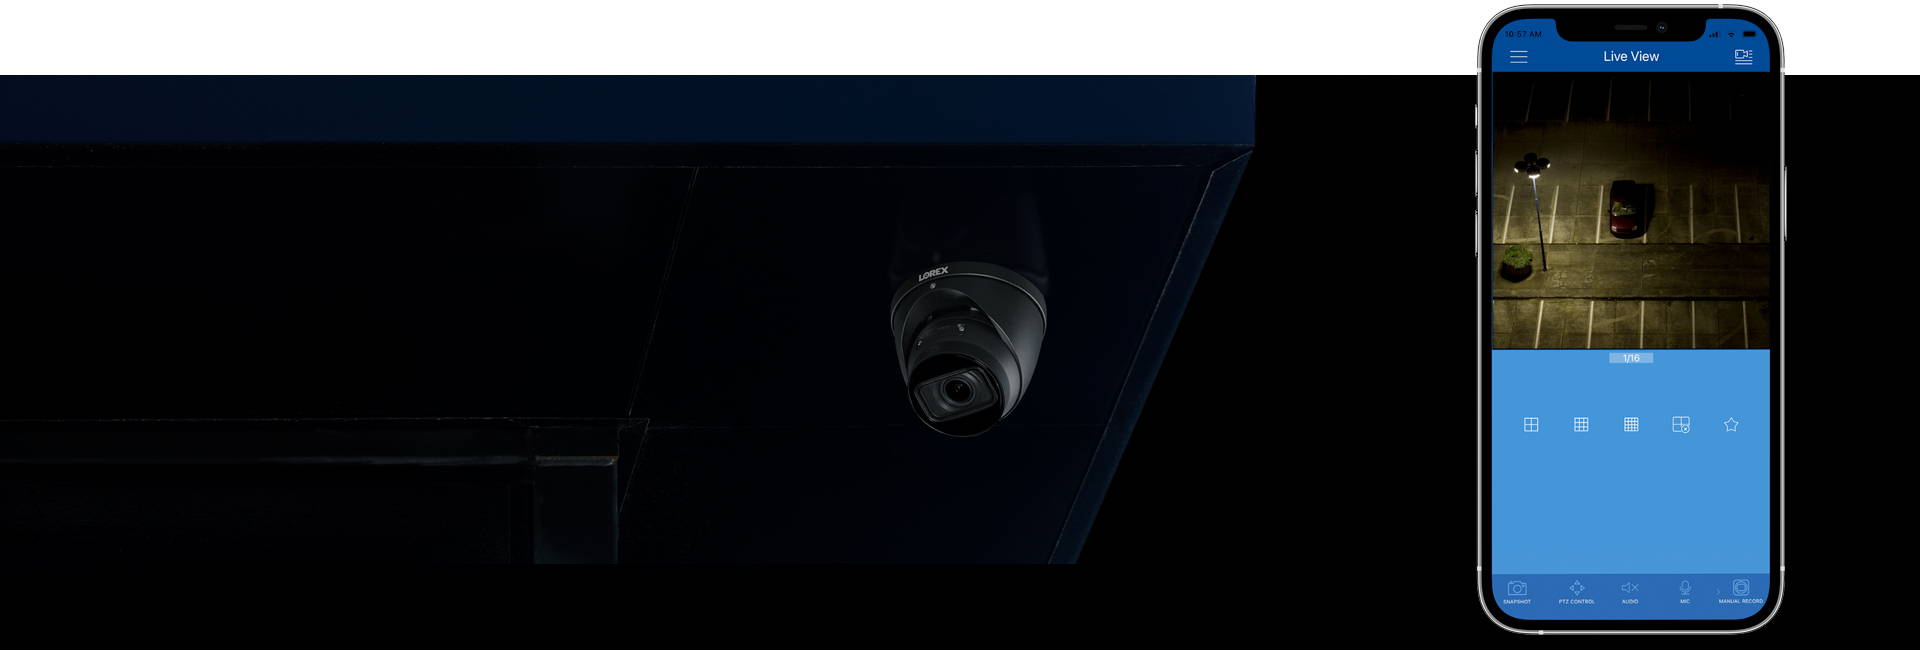 Nocturnal Series Security Cameras